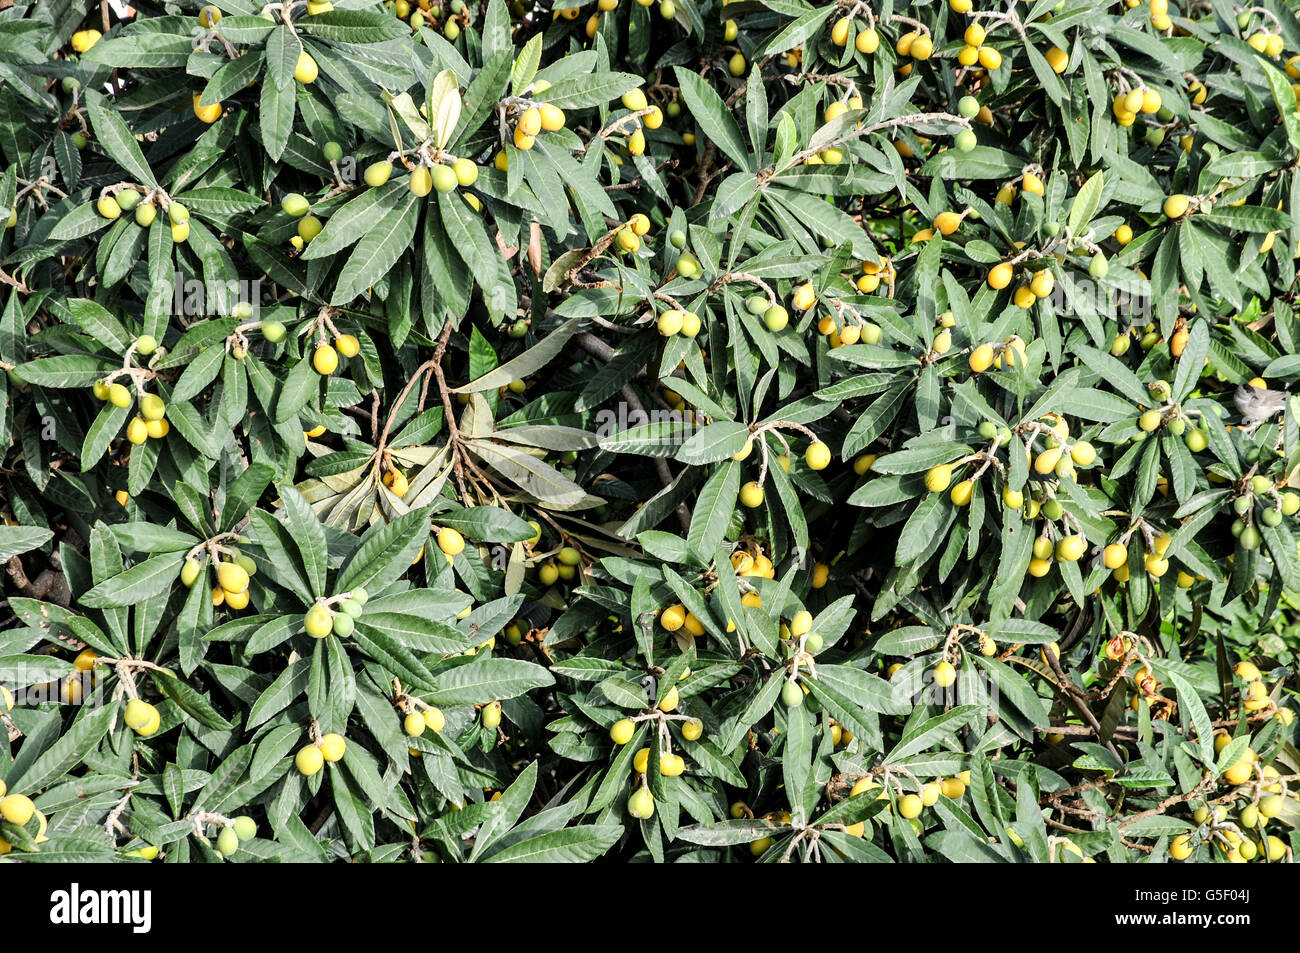 Loquat tree (Eriobotrya japonica) with fruit, Photographed in Israel in spring April Stock Photo